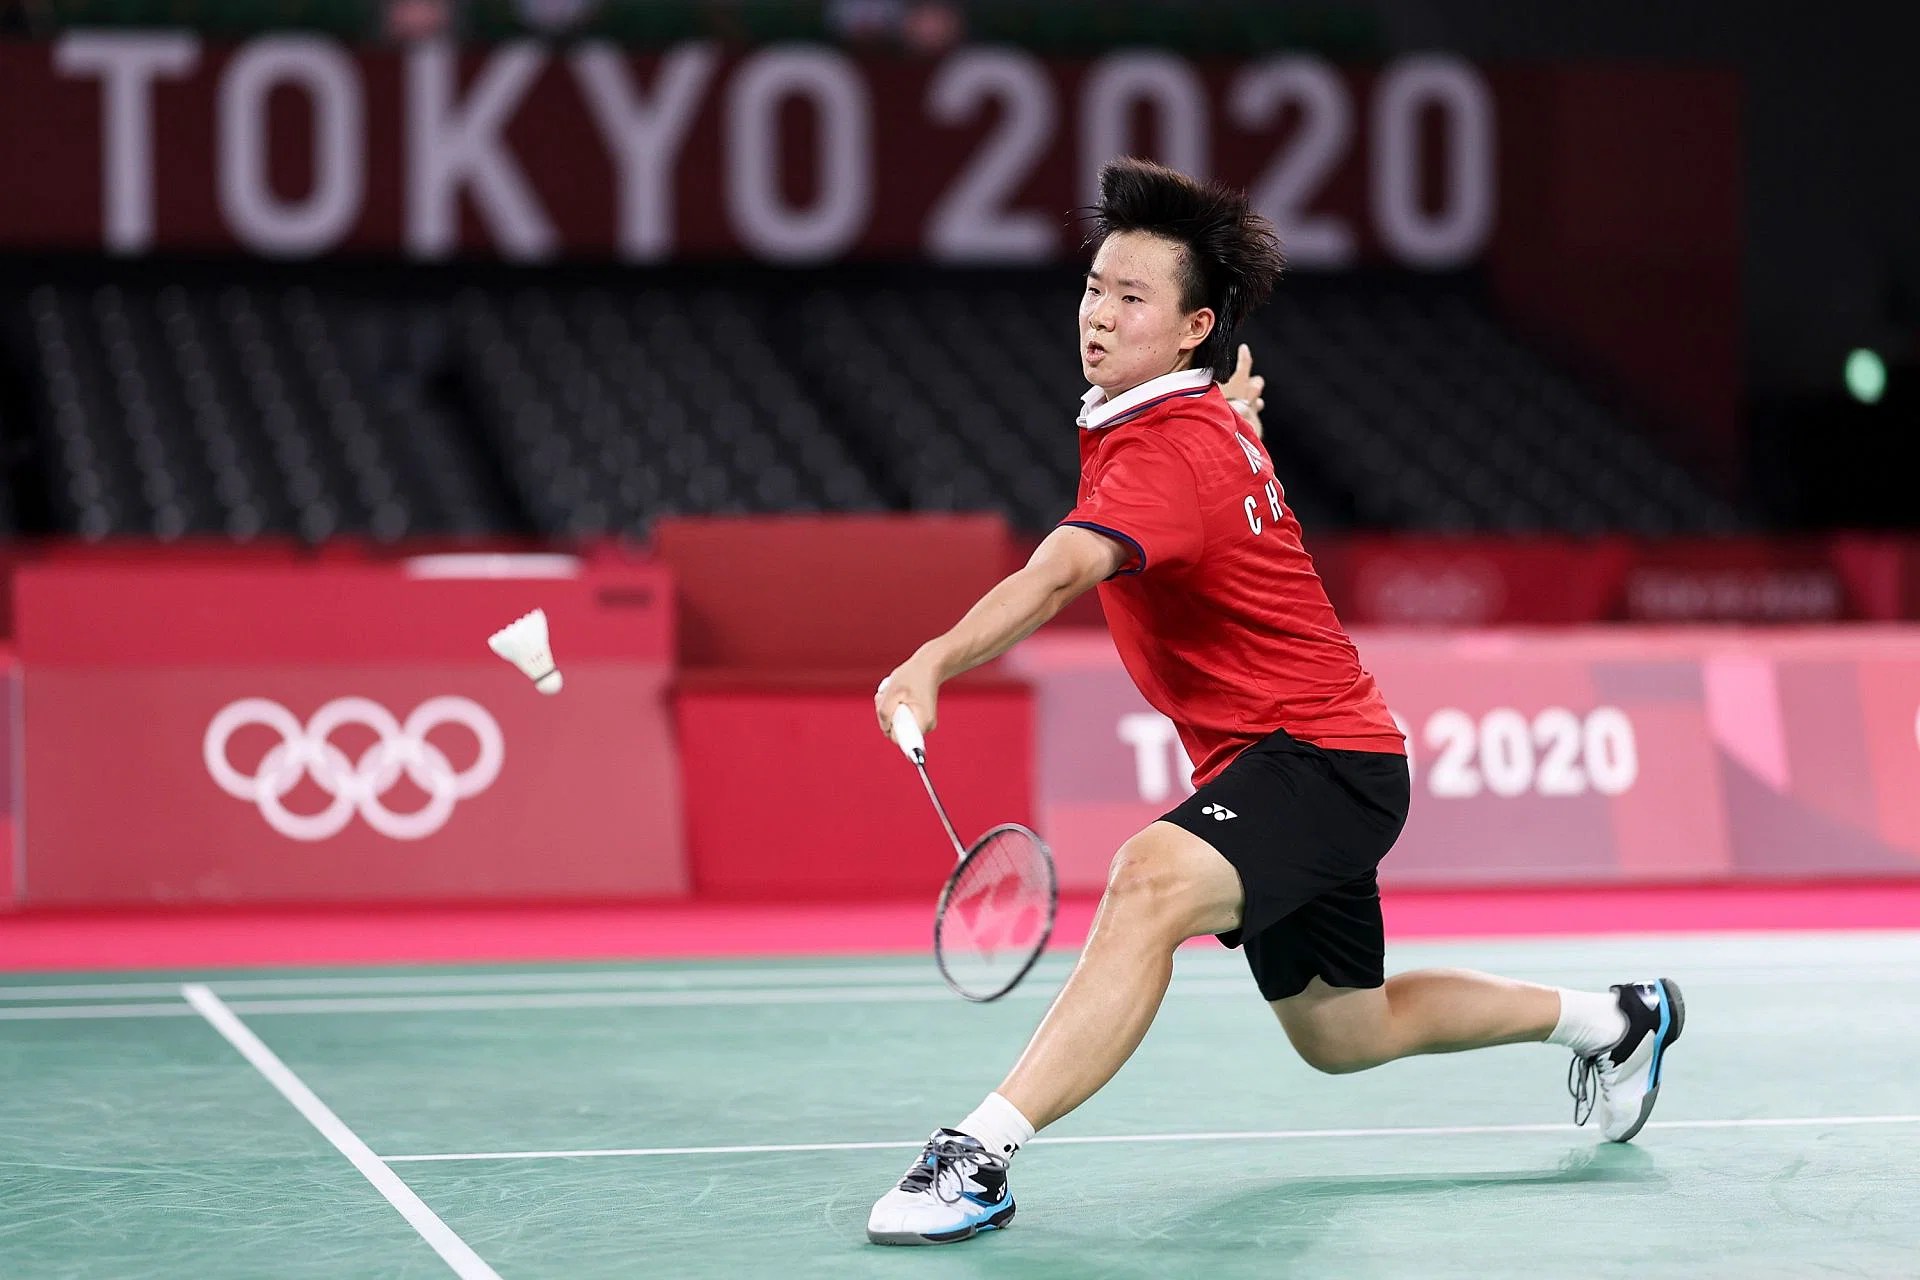 Badminton World Tour Finals LIVE: HS Prannoy faces Lu Guangzu in must-win contest, Viktor Axelsen, Loh Kean Yew aim to extend winning run on Day 2 at BWF World Tour Finals 2022 - Follow LIVE Updates